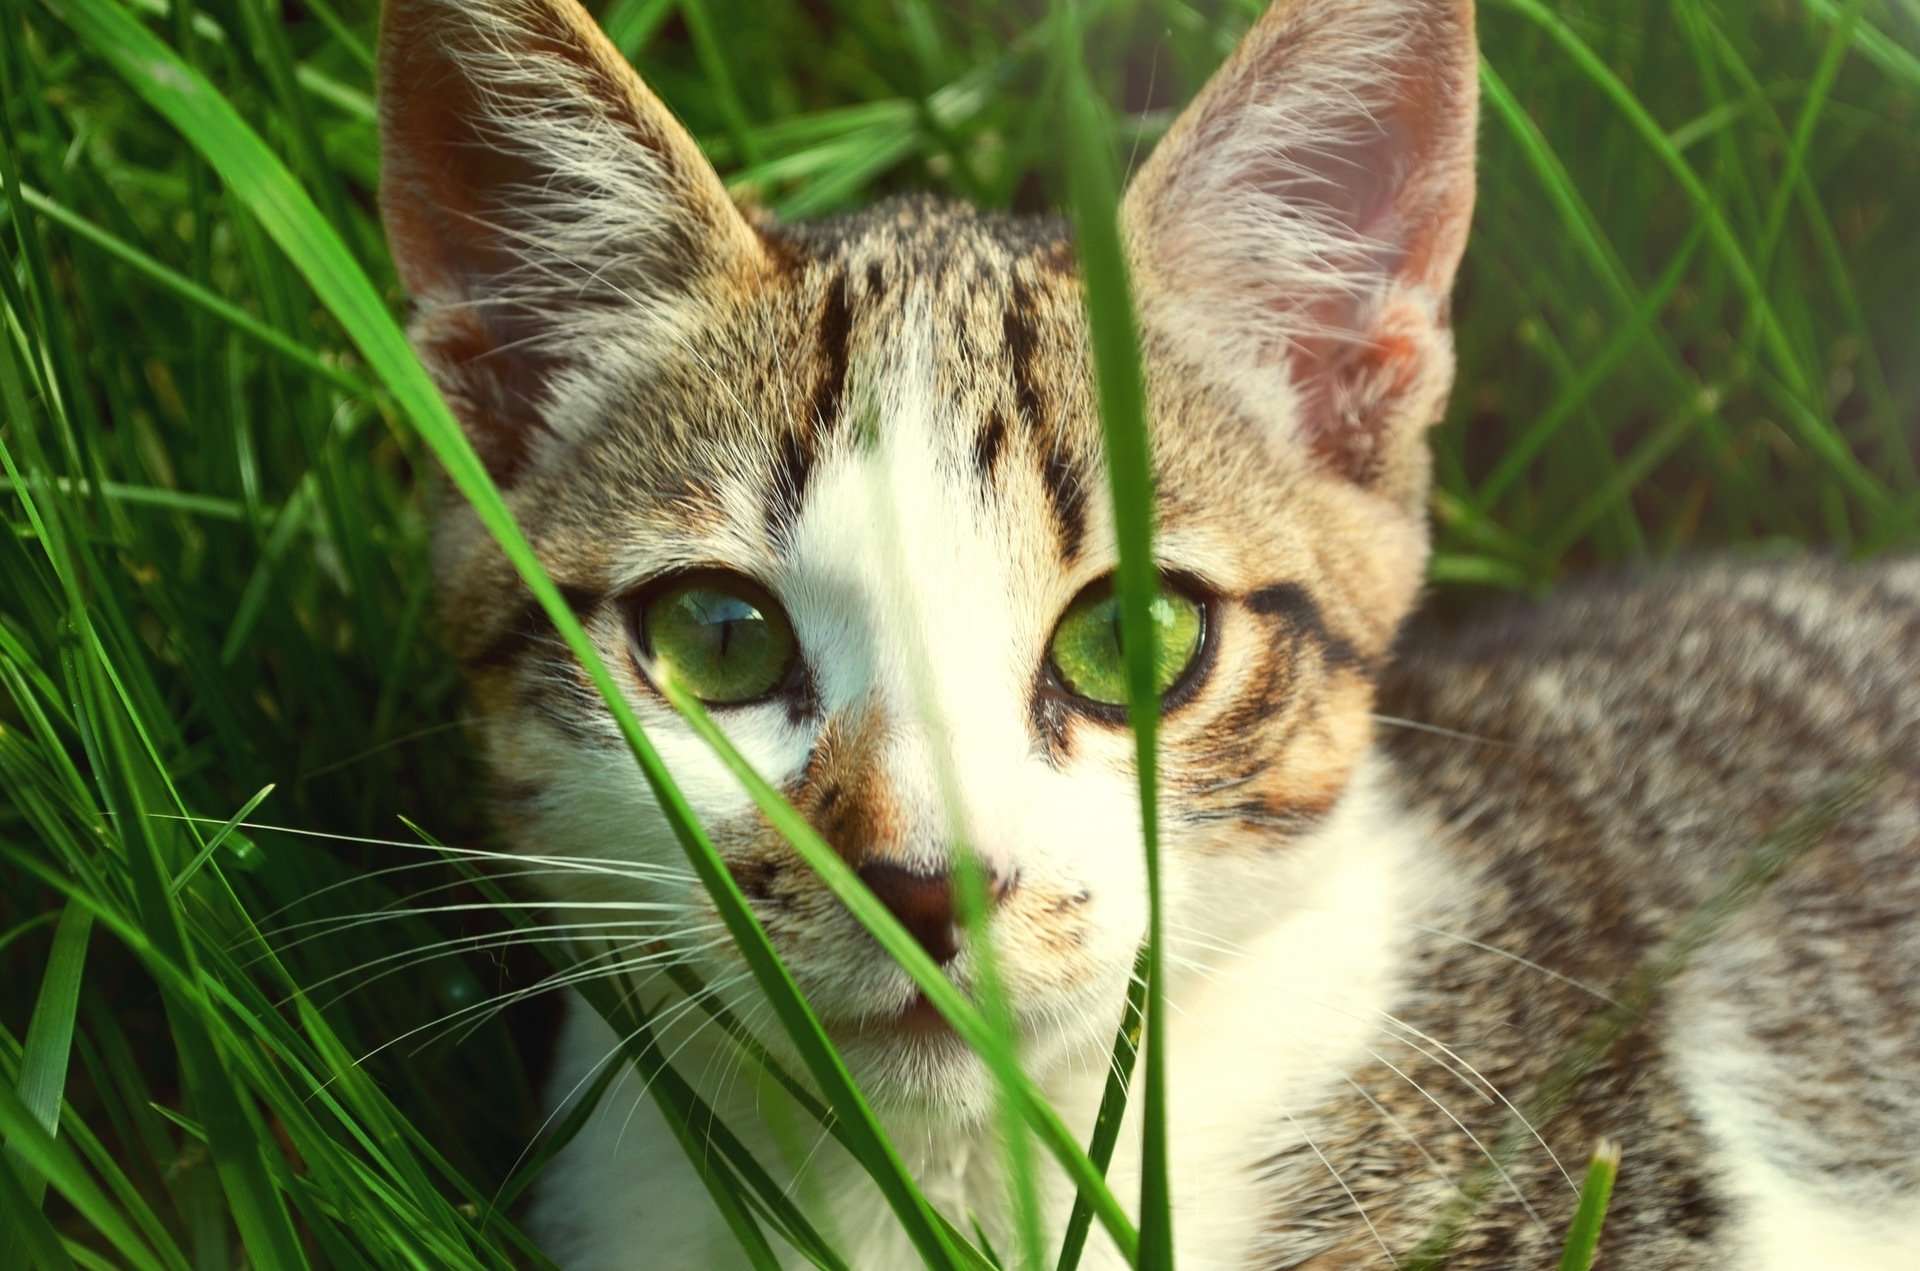 Why Is My Cat Eating Grass and Is It Safe?